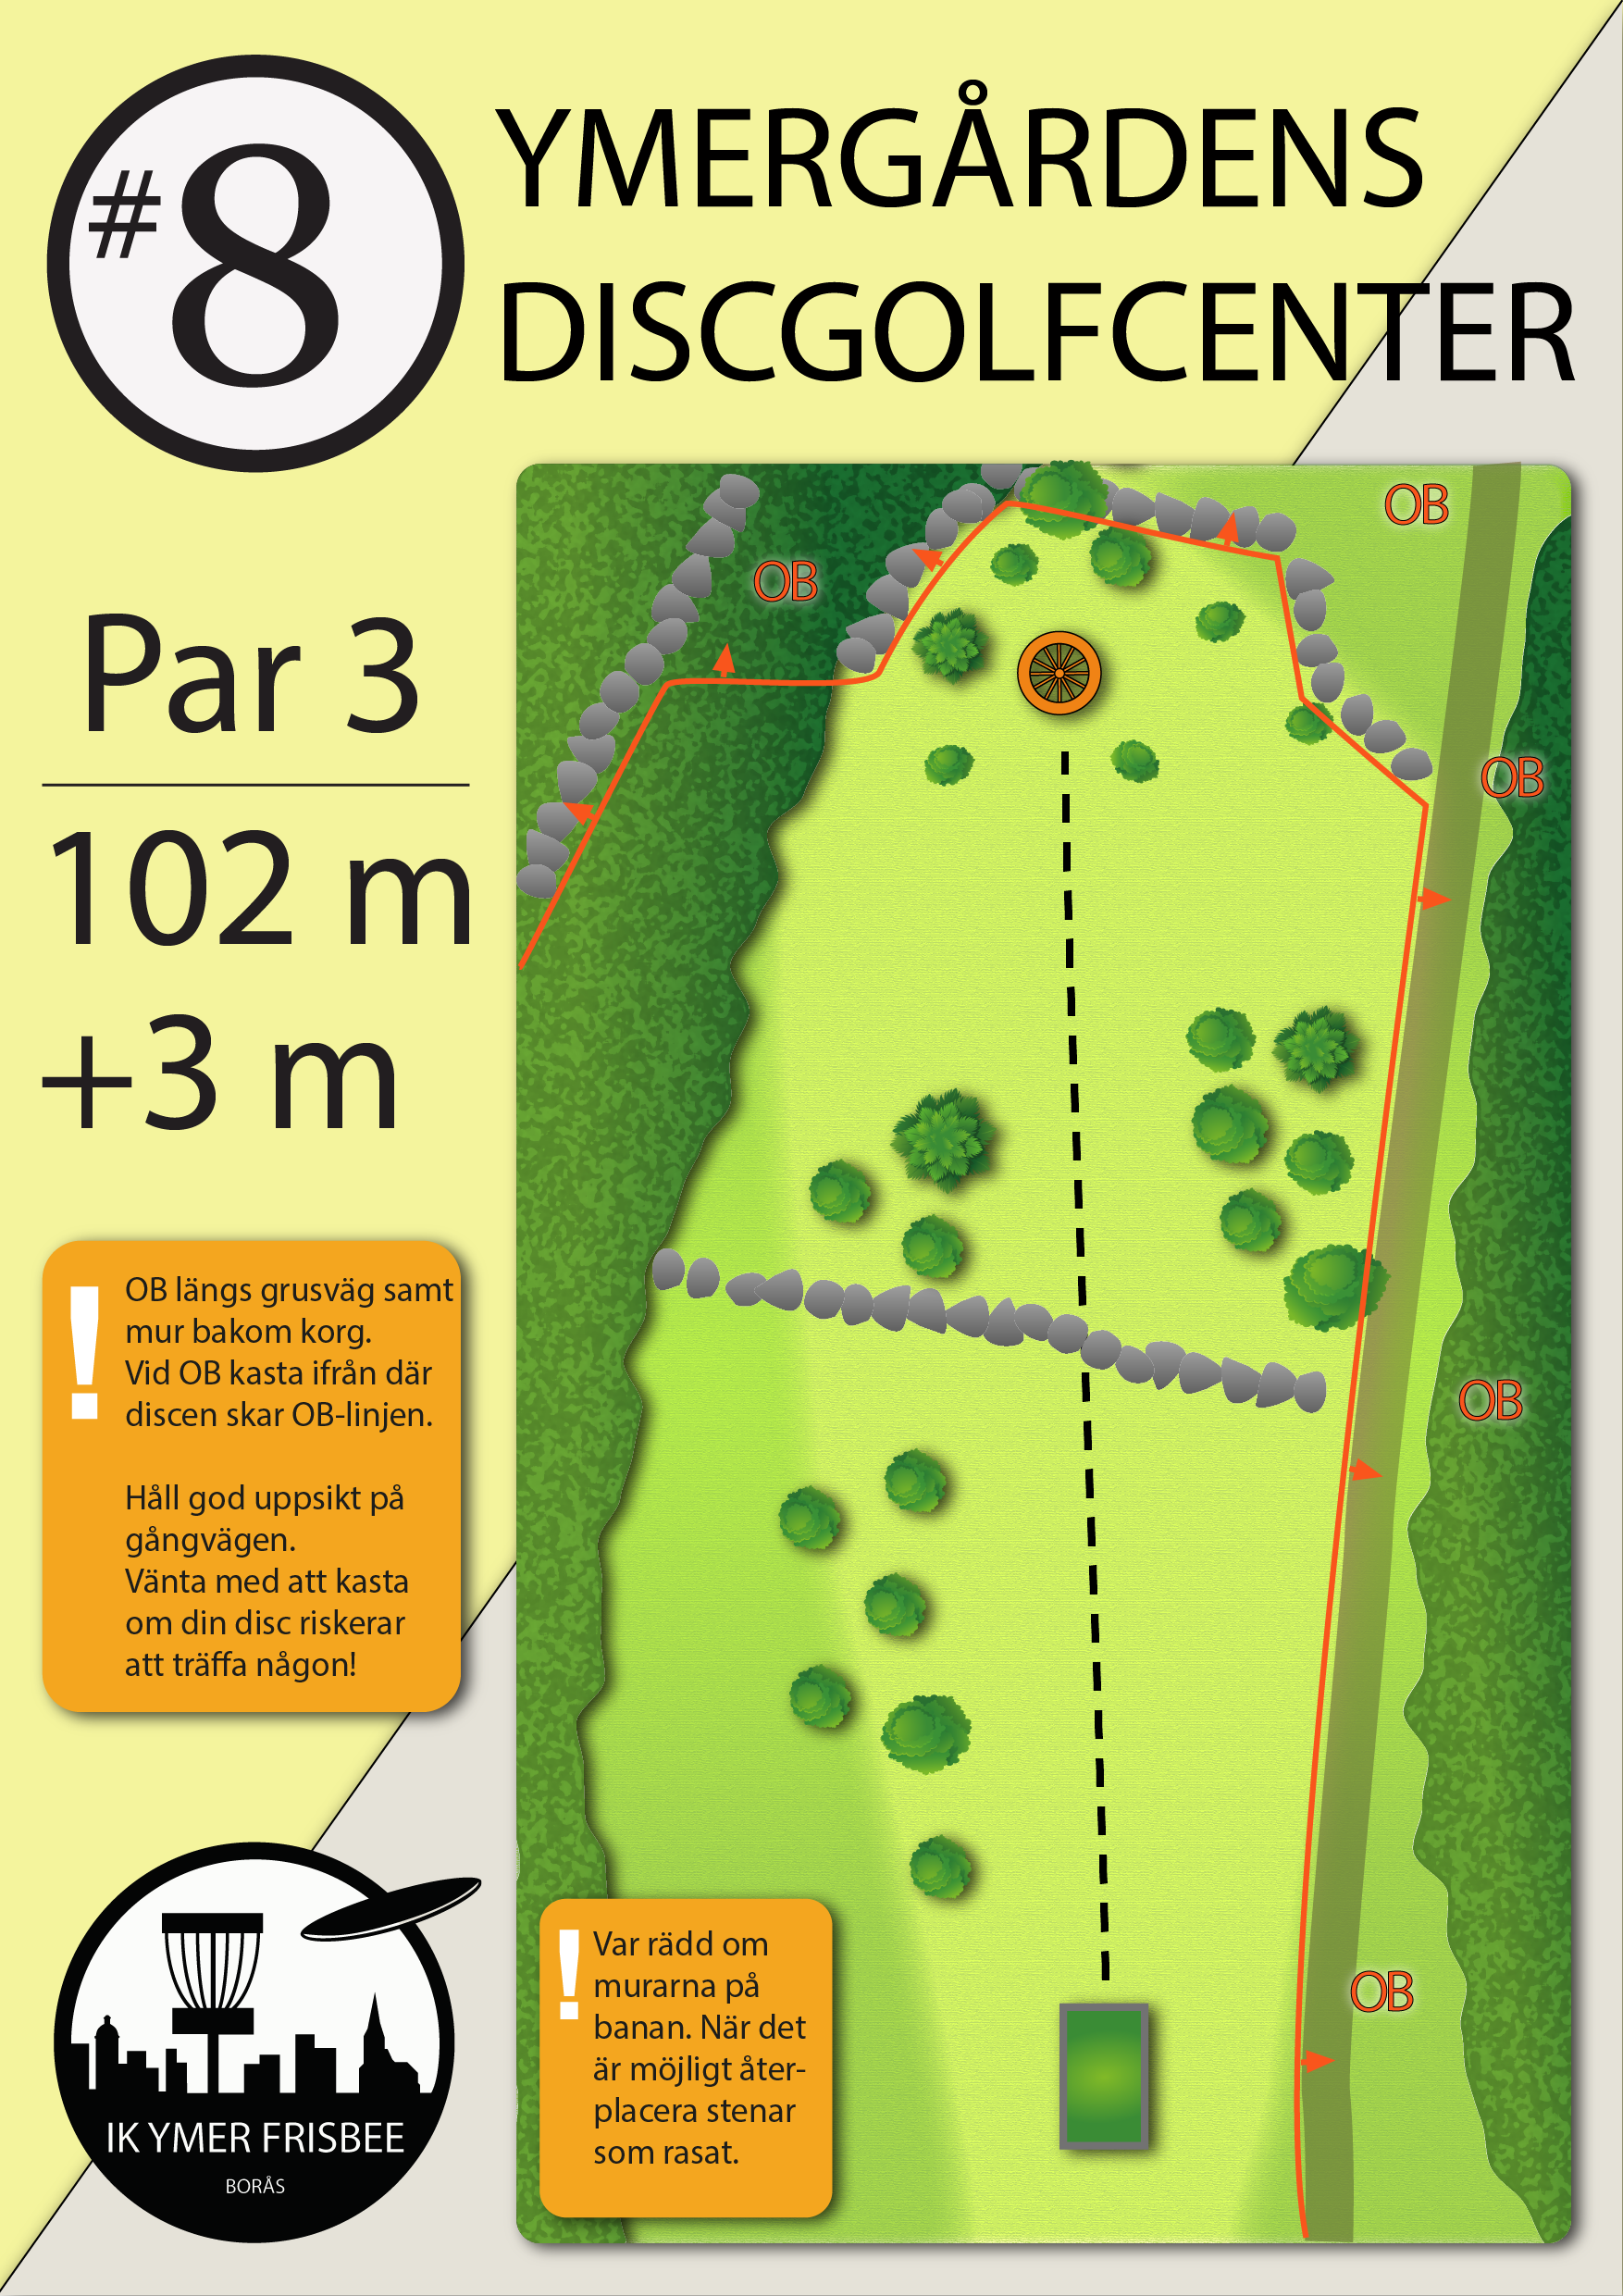 Hole 8 Gold + Silver